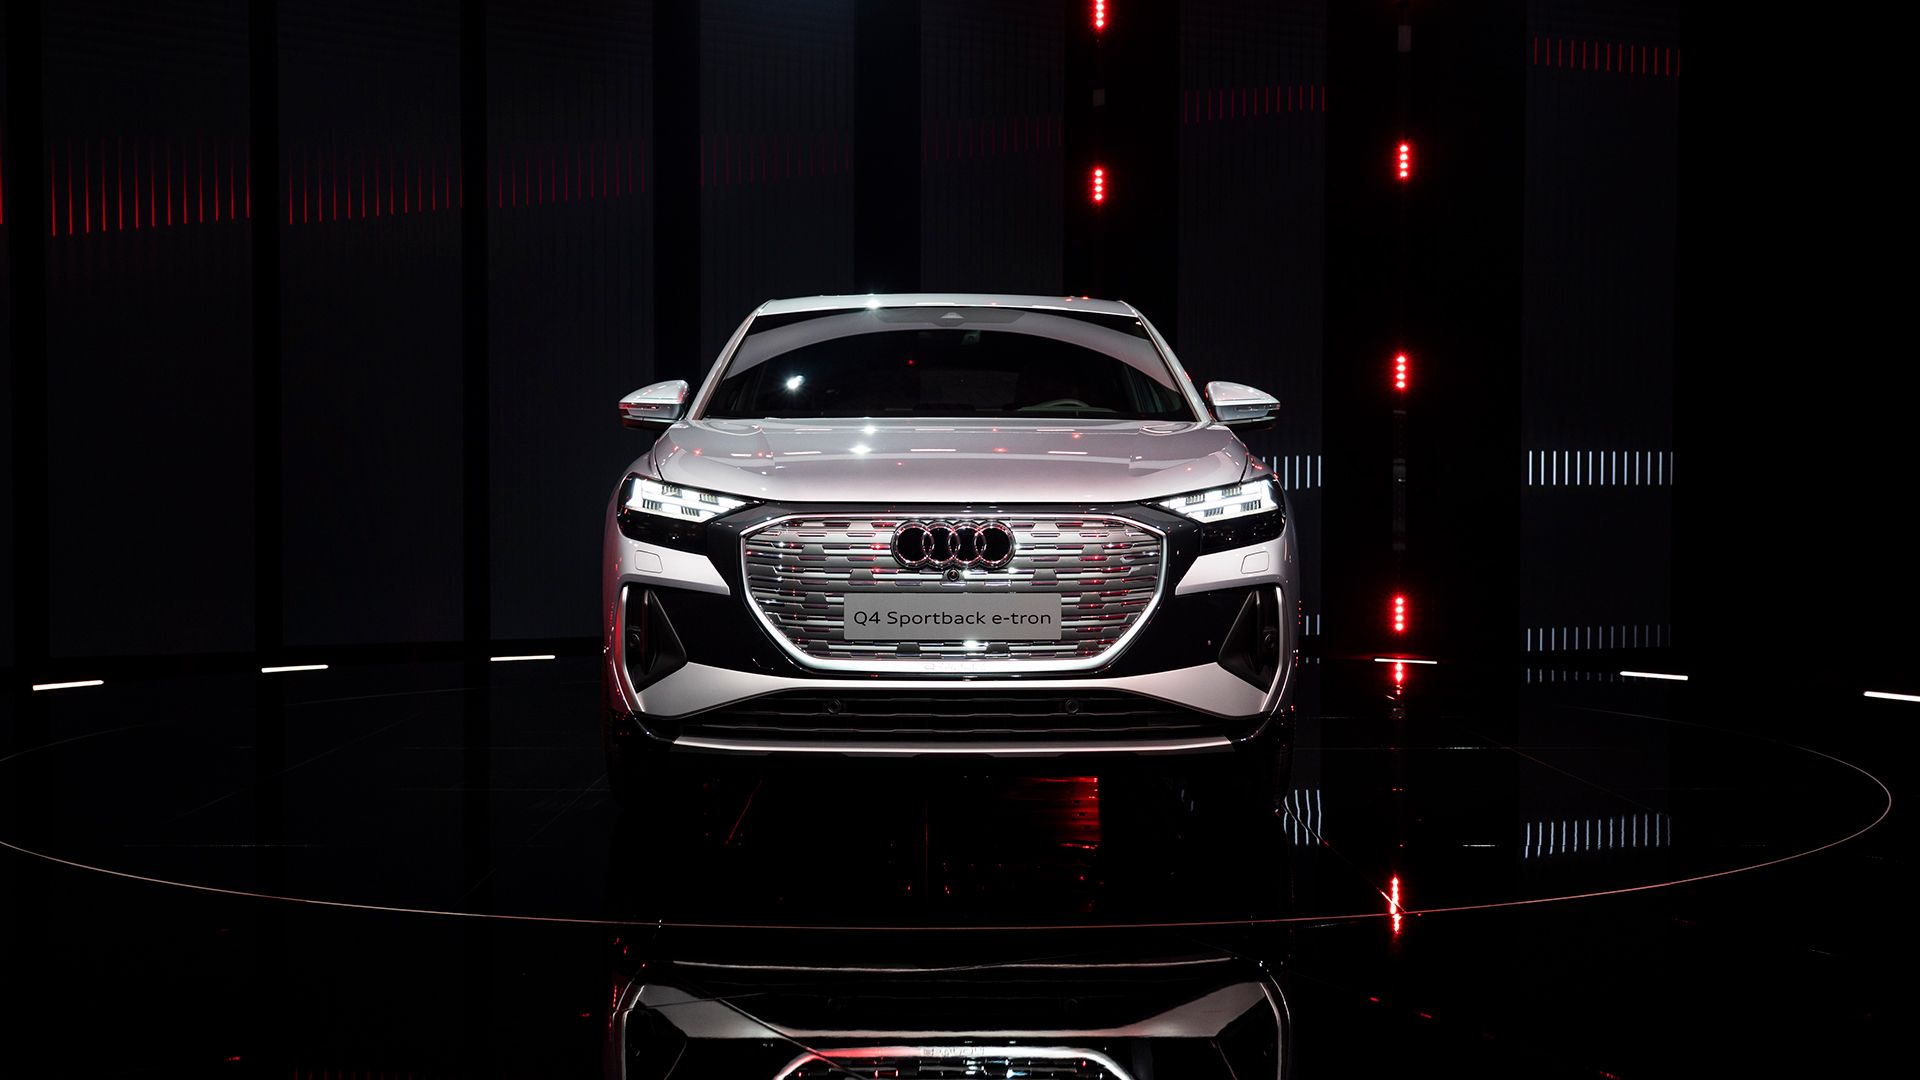  A front view of the silver Audi Q4 Sportback e-tron.